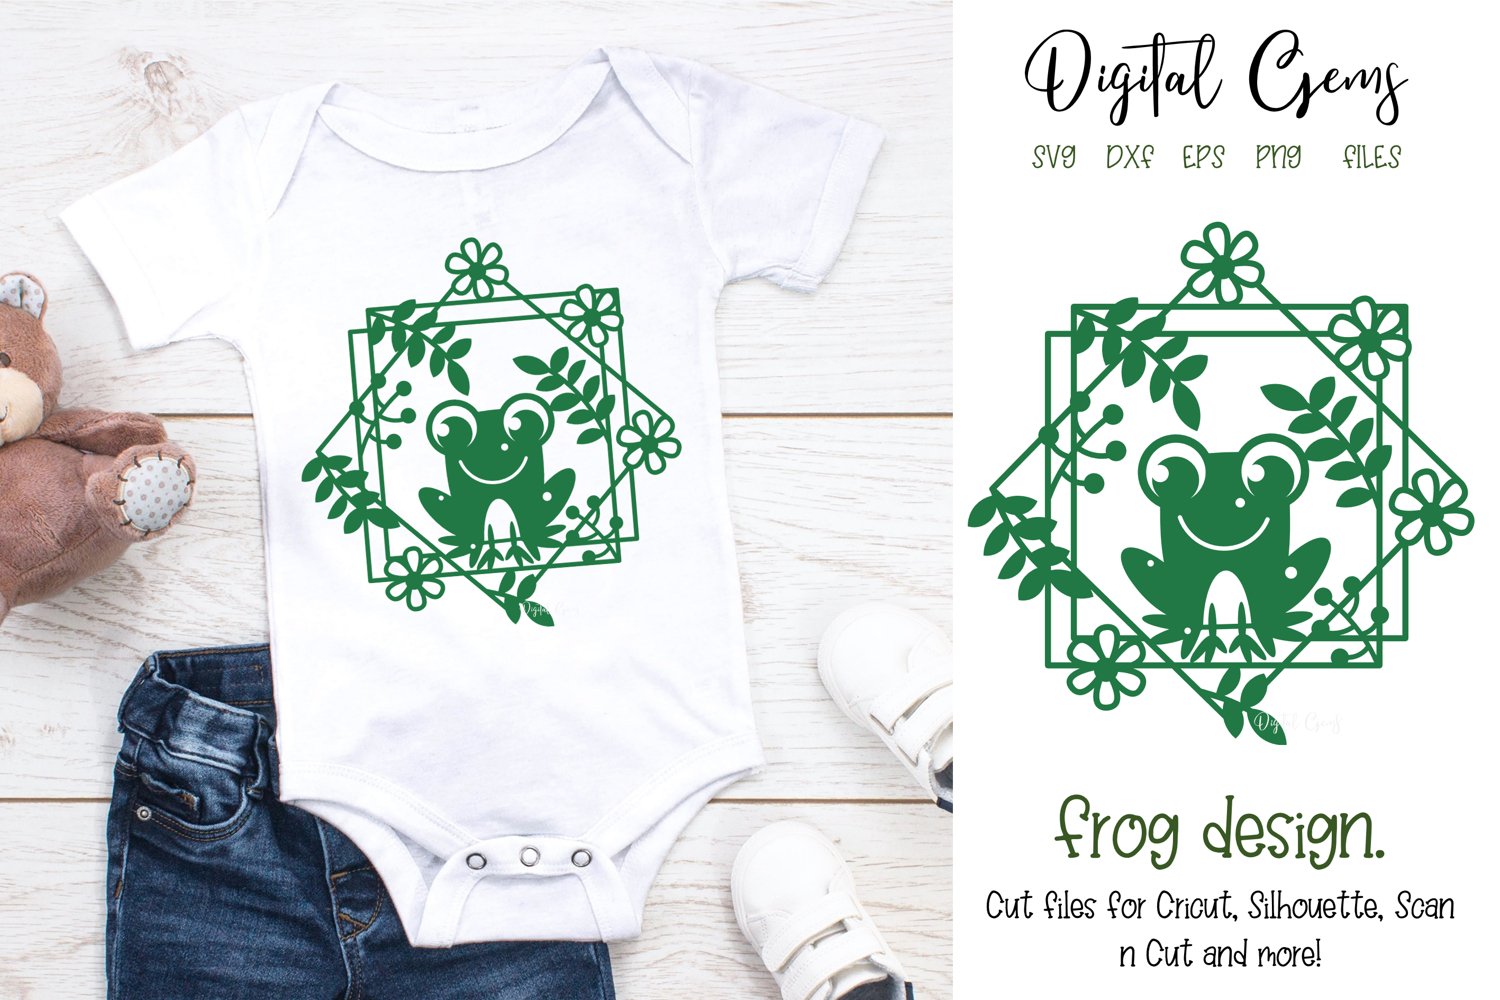 Baby bodysuit with a frog design on it.